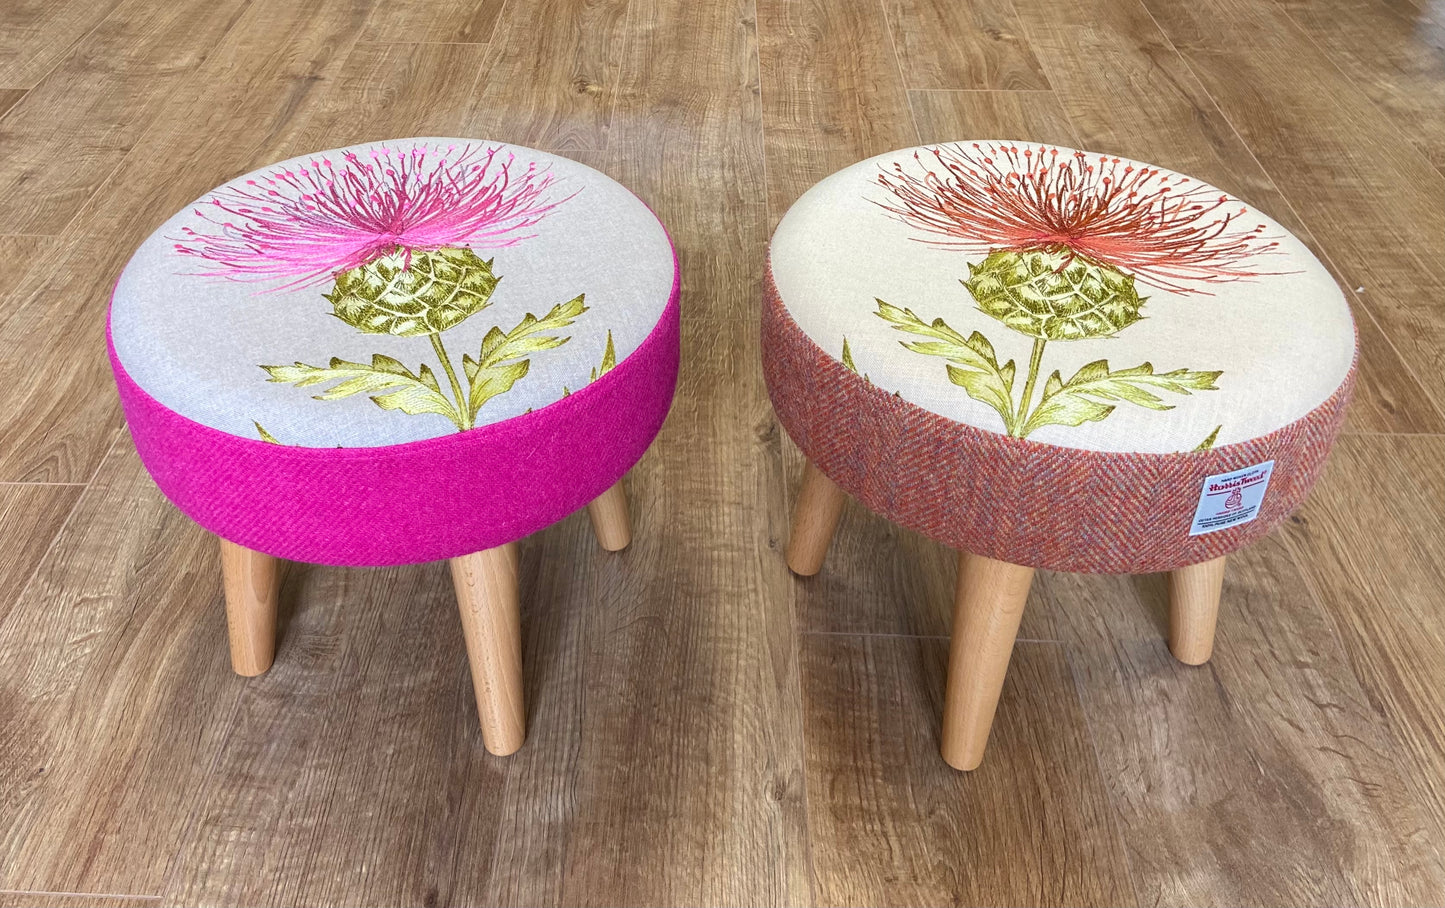 Bright Pink Embroidered Thistle and Harris Tweed Footstool with Varnished Wooden Legs